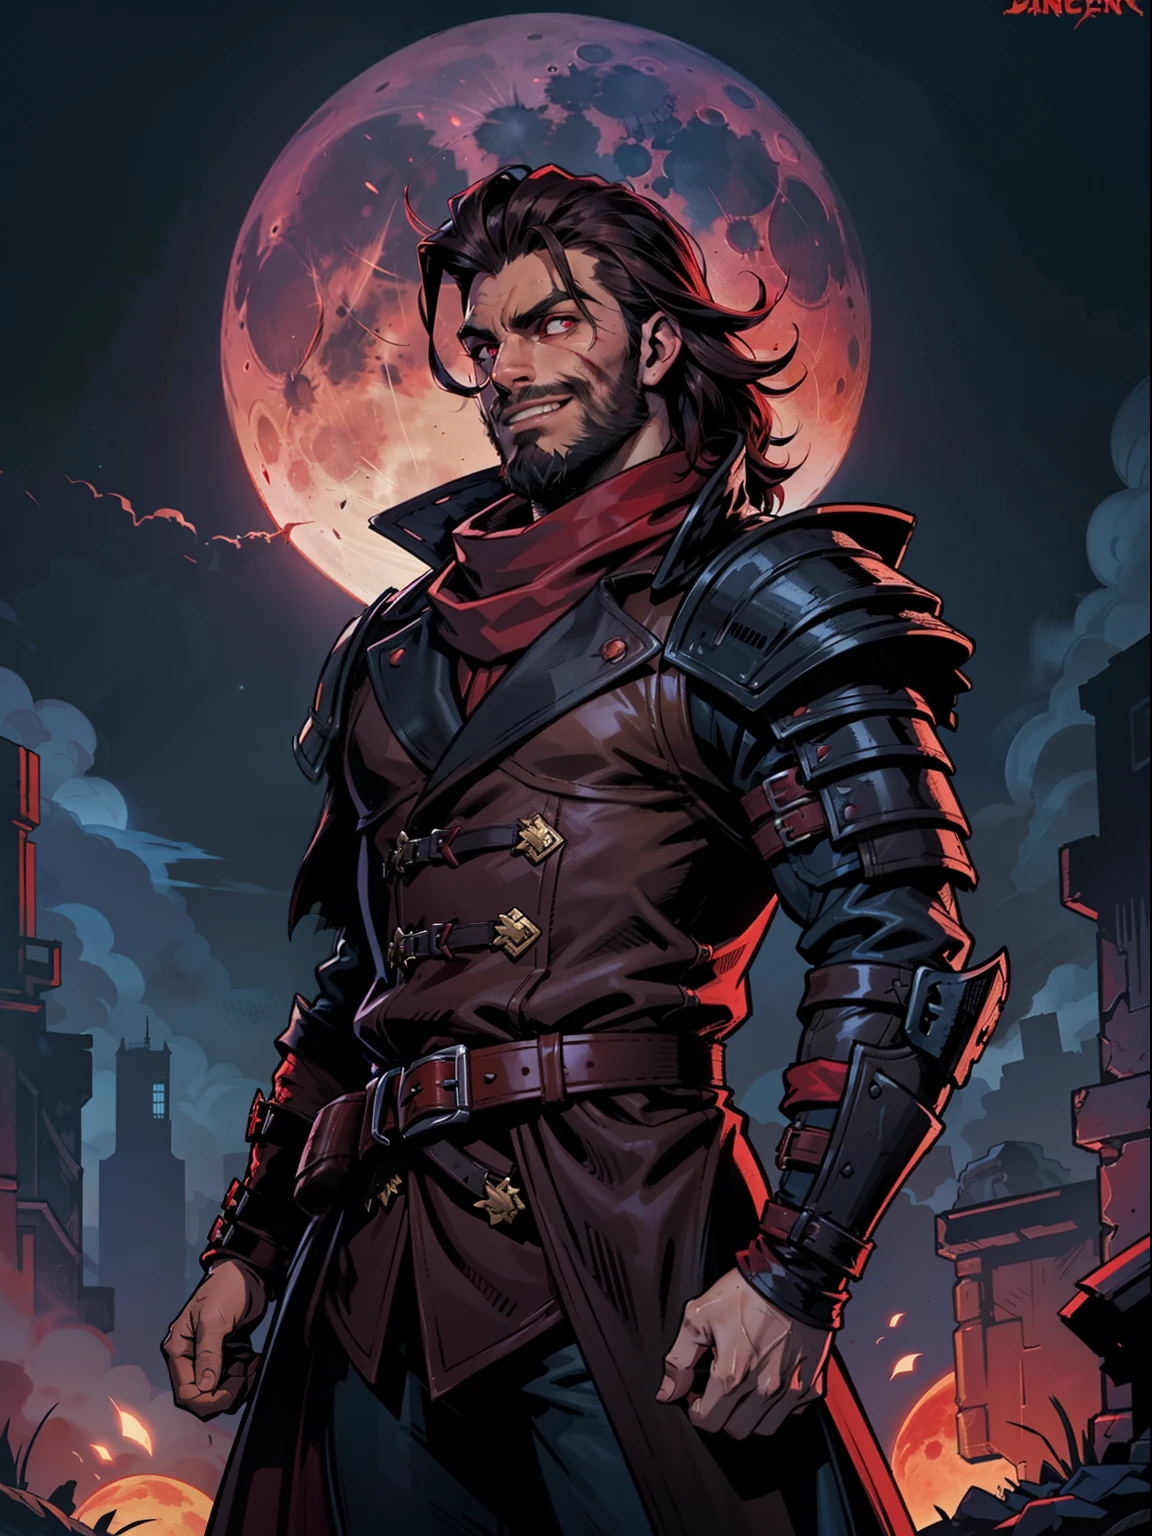 Dark night blood moon background, Darkest dungeon style, looking at the moon, game portrait, Sadurang from Marvel, hunk, short mane hair, mullet, defined face, detailed eyes, short beard, glowing red eyes, dark hair, wily smile, badass, dangerous, wearing classy trench overcoat over armor and red scarf